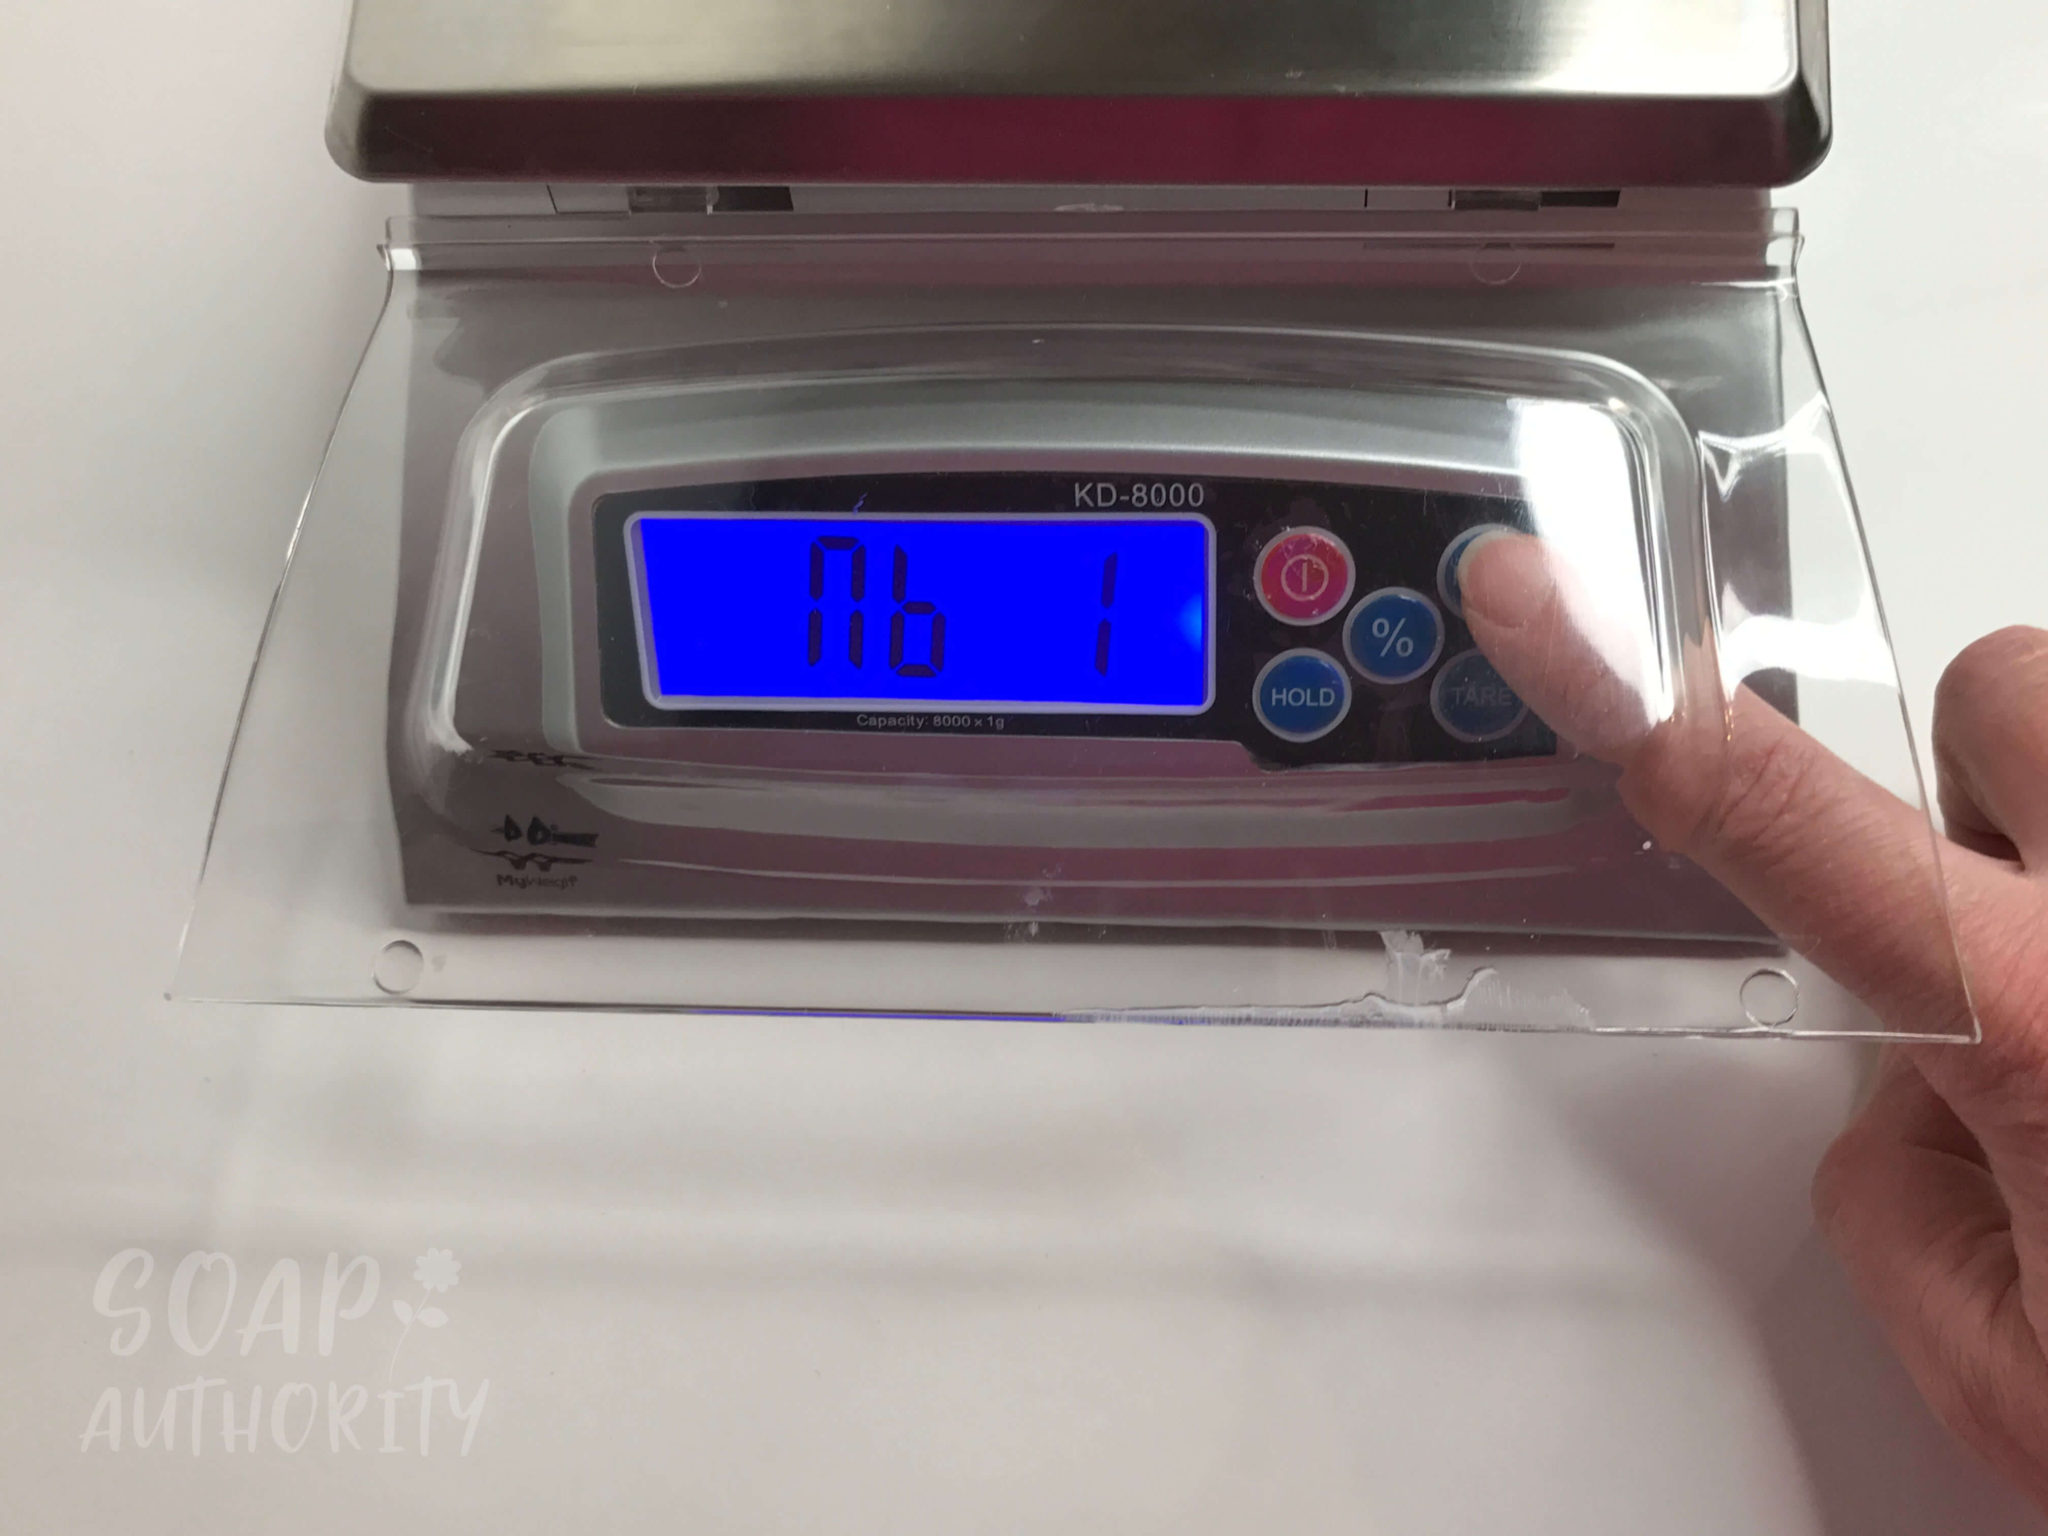 Preventing Your Soap Scale From Shutting OFF Automatically - Soap Authority: Preventing your soap scale from shutting off automatically will save you lots of time, frustration and even money! Follow my easy instructions to set up your scale properly.